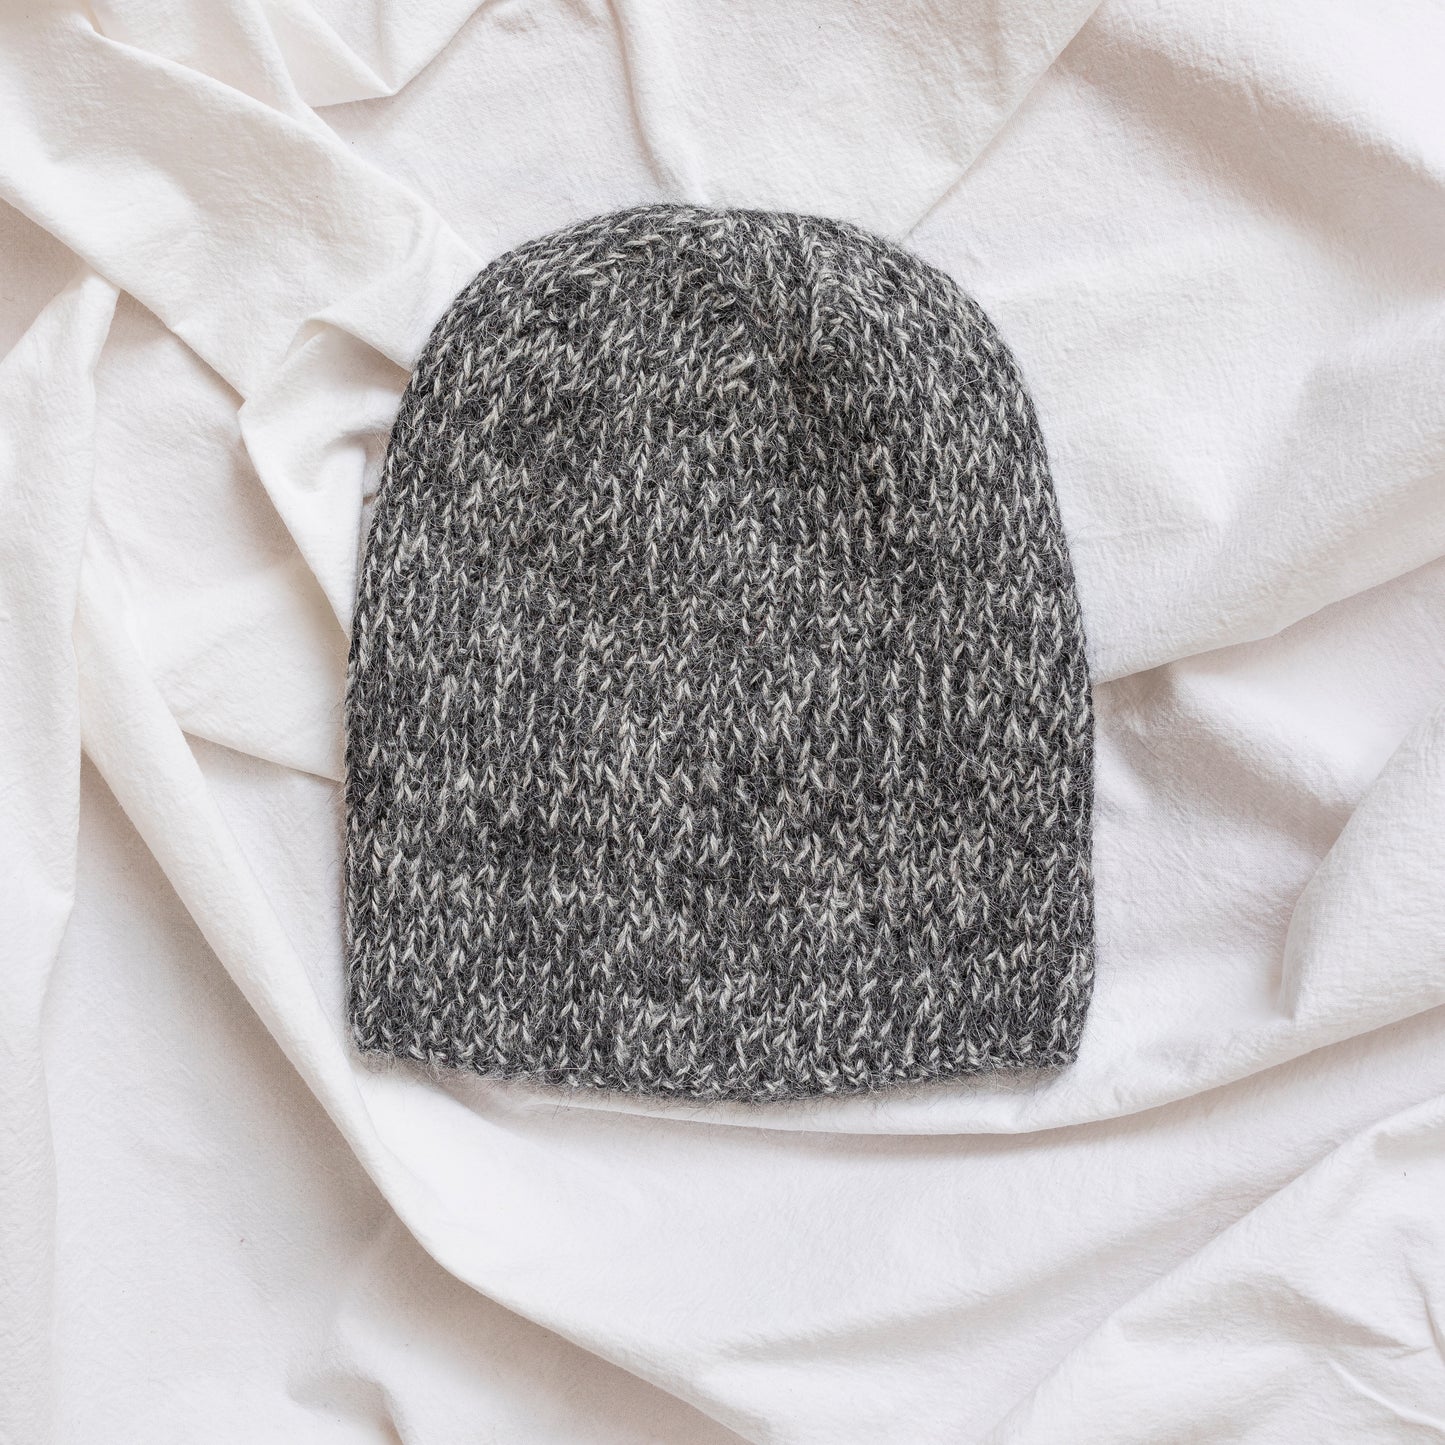  Soft and luxurious alpaca knit fisherman's beanie in color charcoal. 